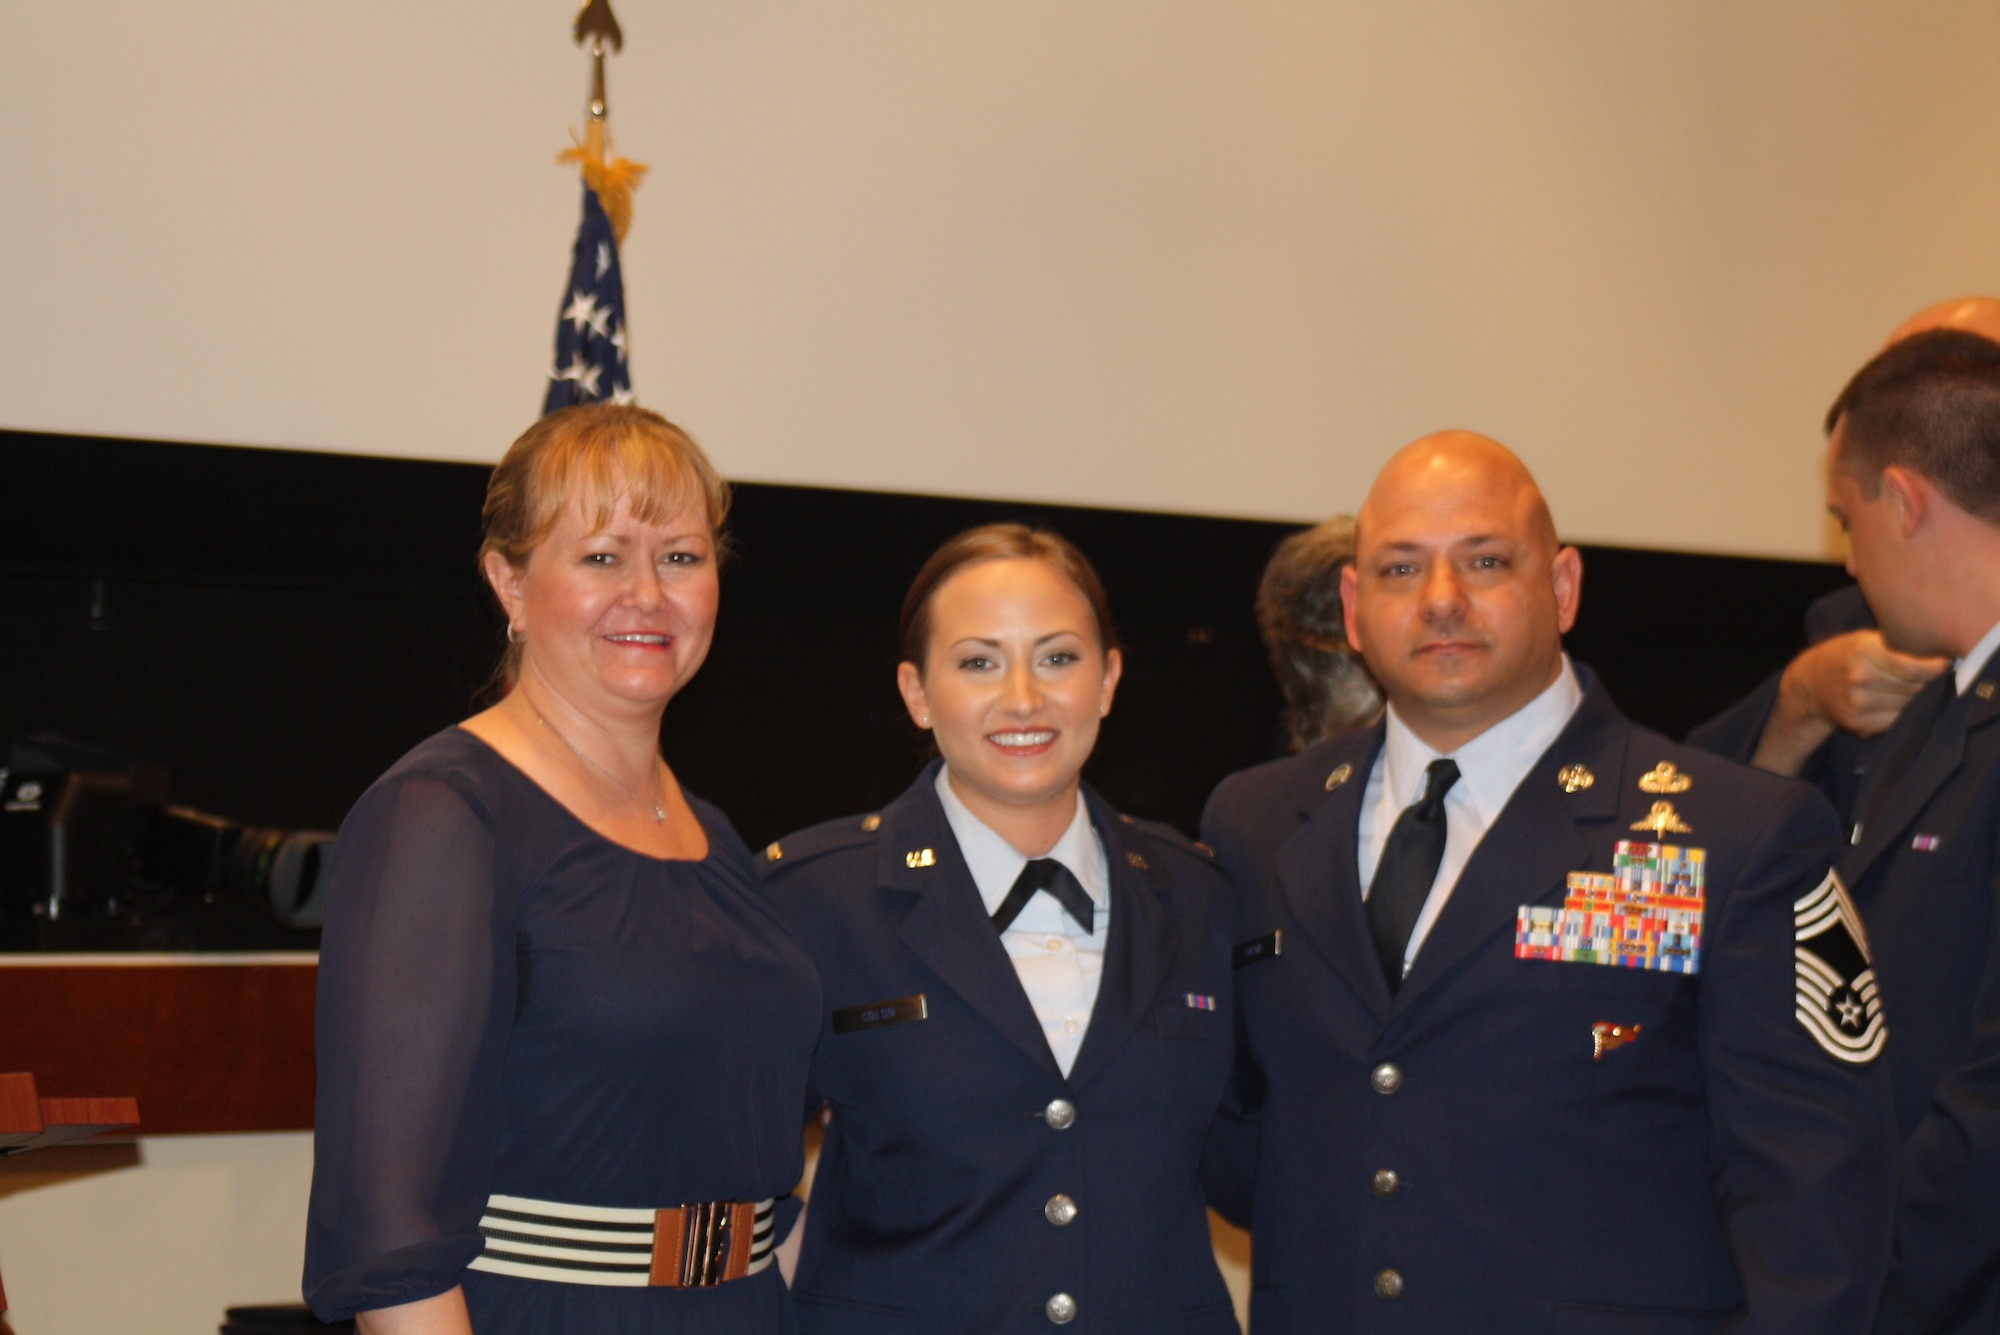 2nd Lt. Jenna Colon poses for a photo with her family after her commissioning ceremony at East Carolina University, May 9, 2015. 2nd Lt. Colon is continuing a family tradition of military service that stretches back to the Korean War. (Courtesy photo)